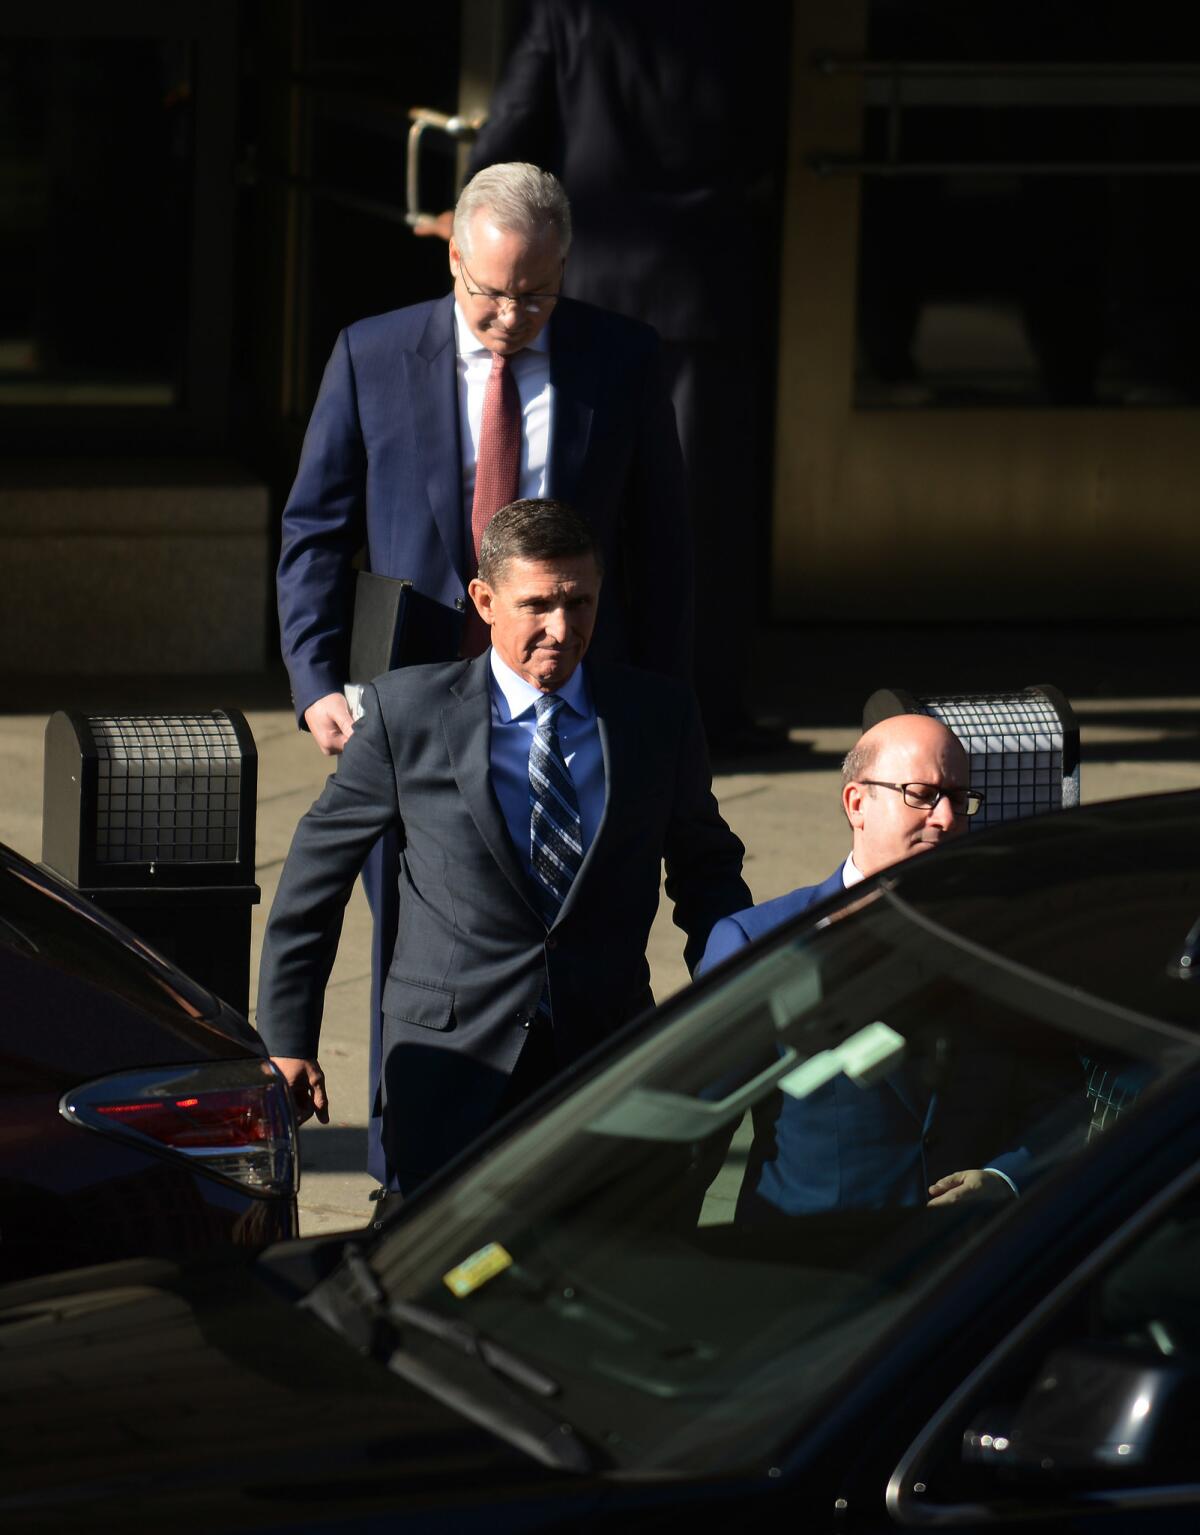 Michael Flynn, former national security advisor to President Trump, pleaded guilty to lying to the FBI.